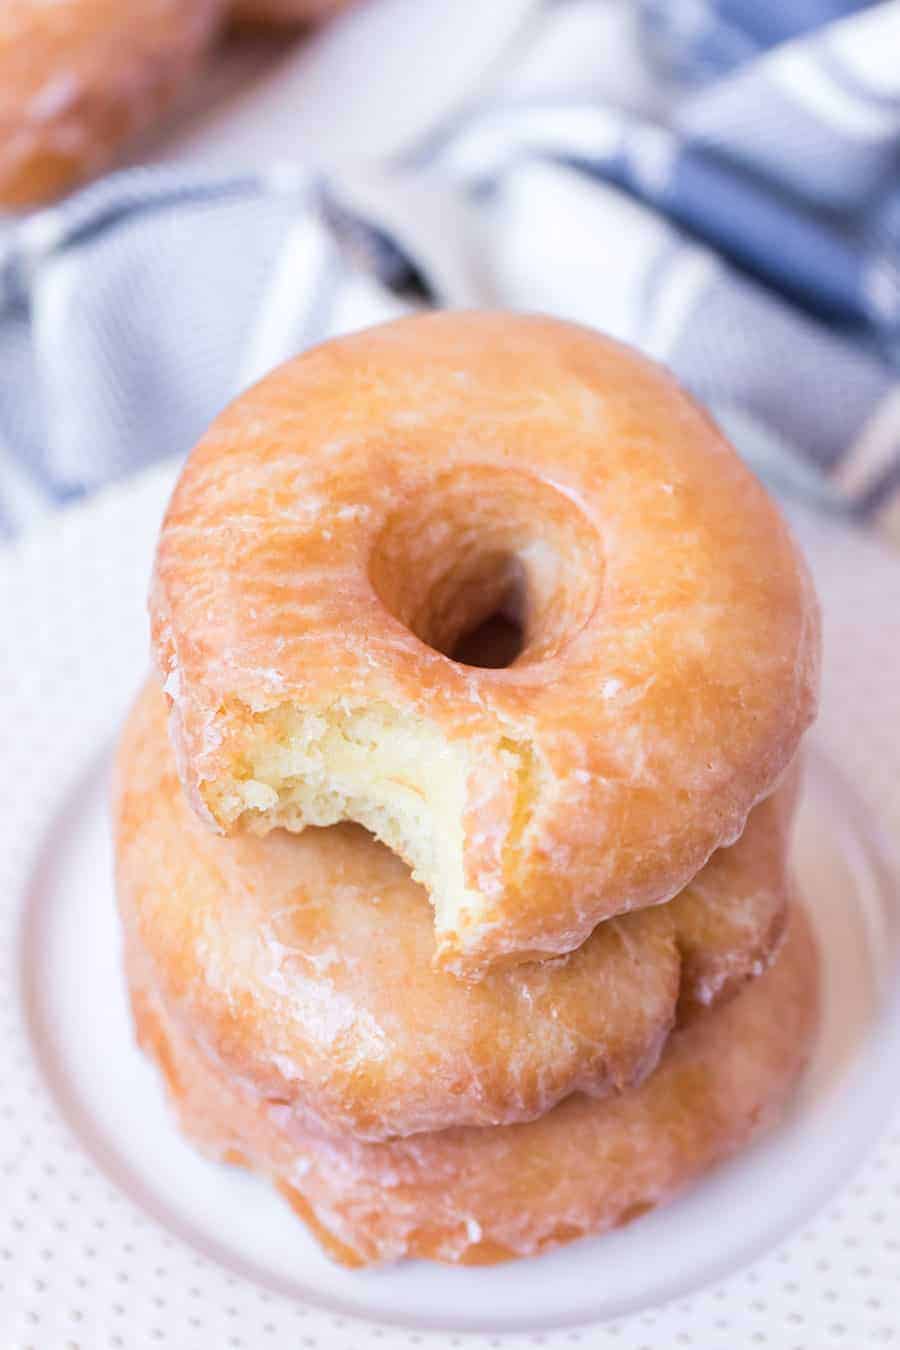 Top view of a stack of three old fashioned glazed doughnuts with the top one having a bite taken out.